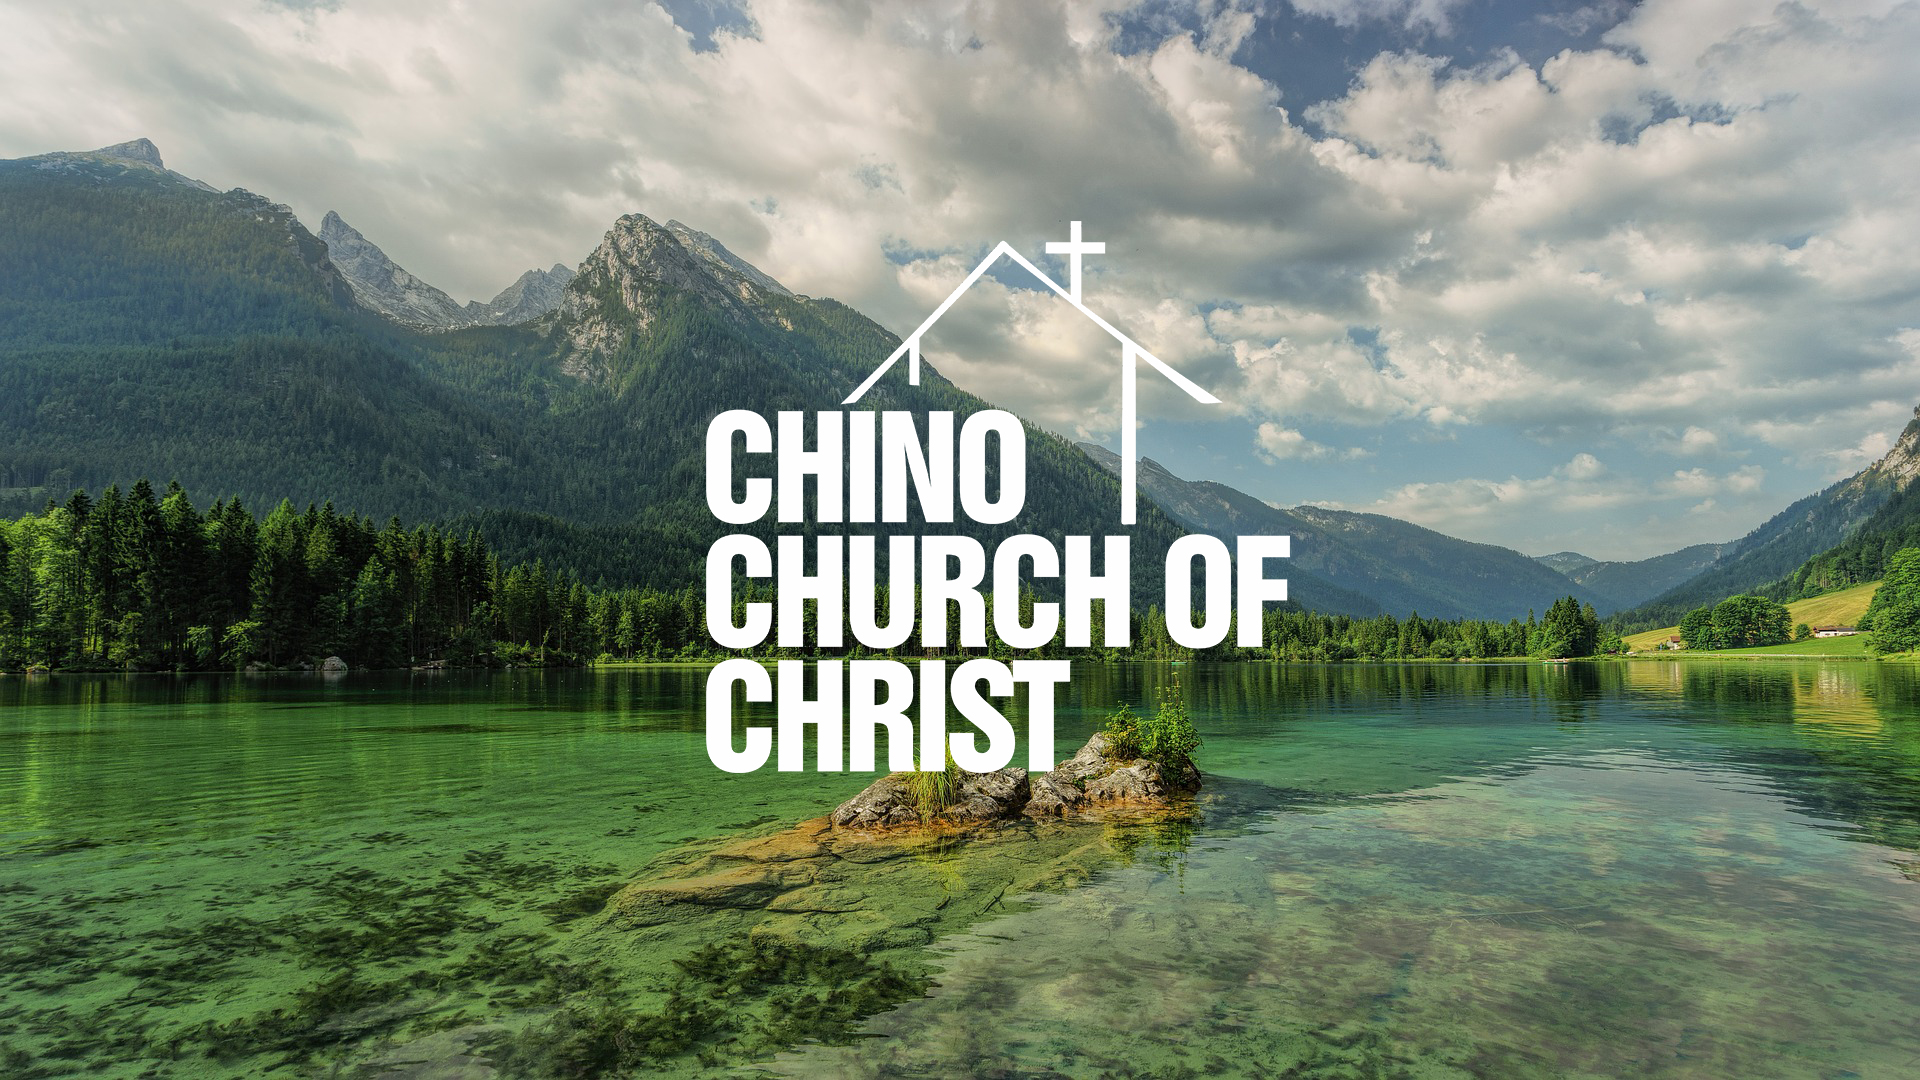 How Can I Support the Lord’s Church in Chino?